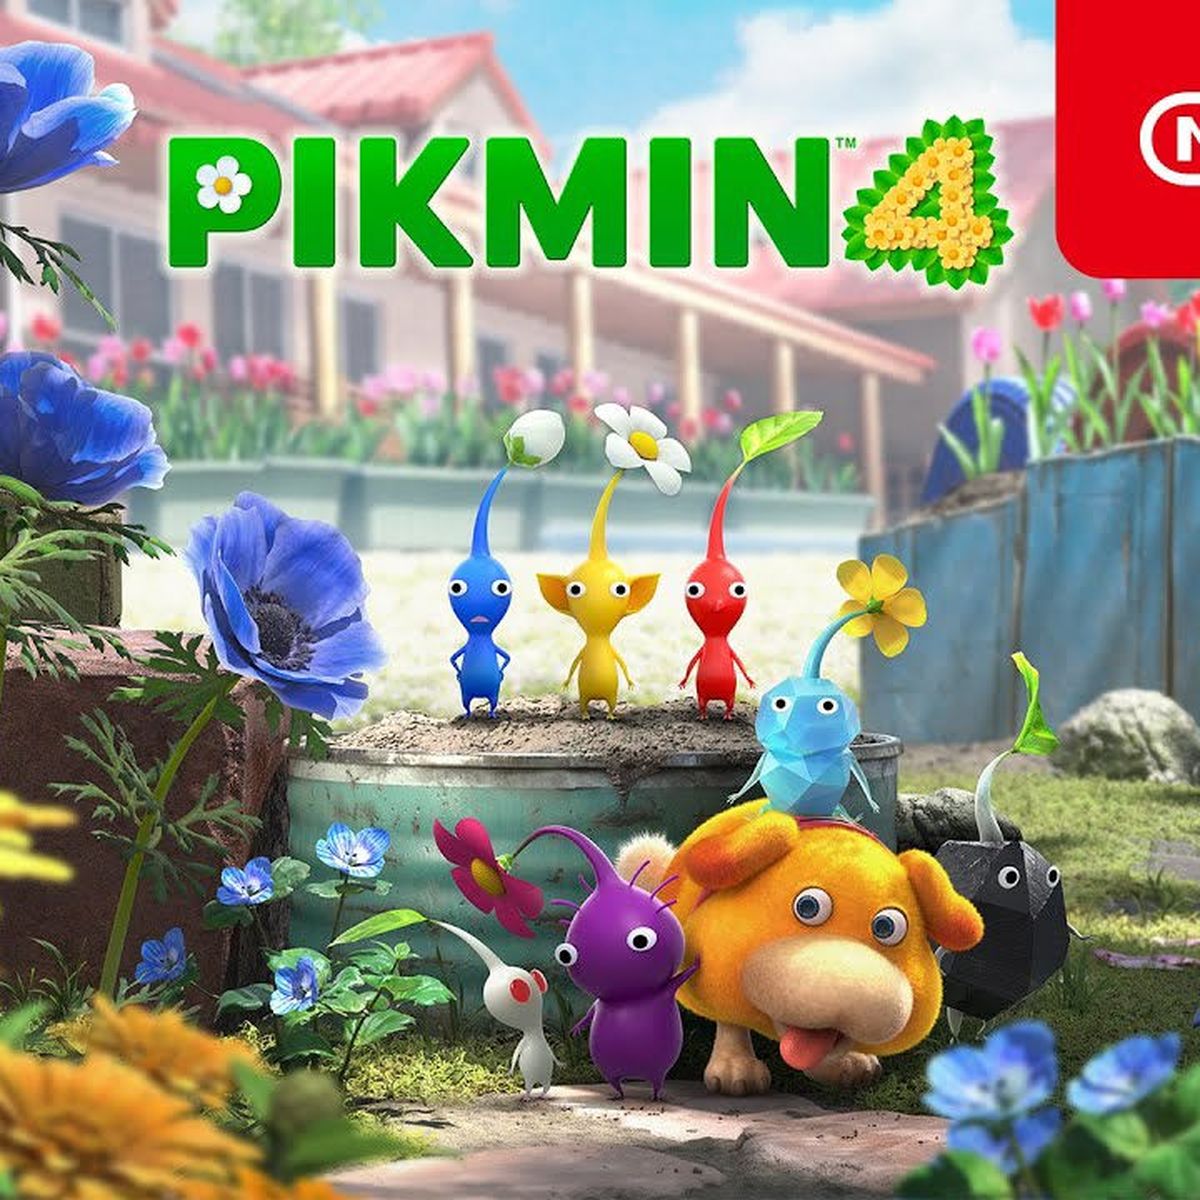 Pikmin 4: Sun-Speckled Terrace 100% Completion Guide - All